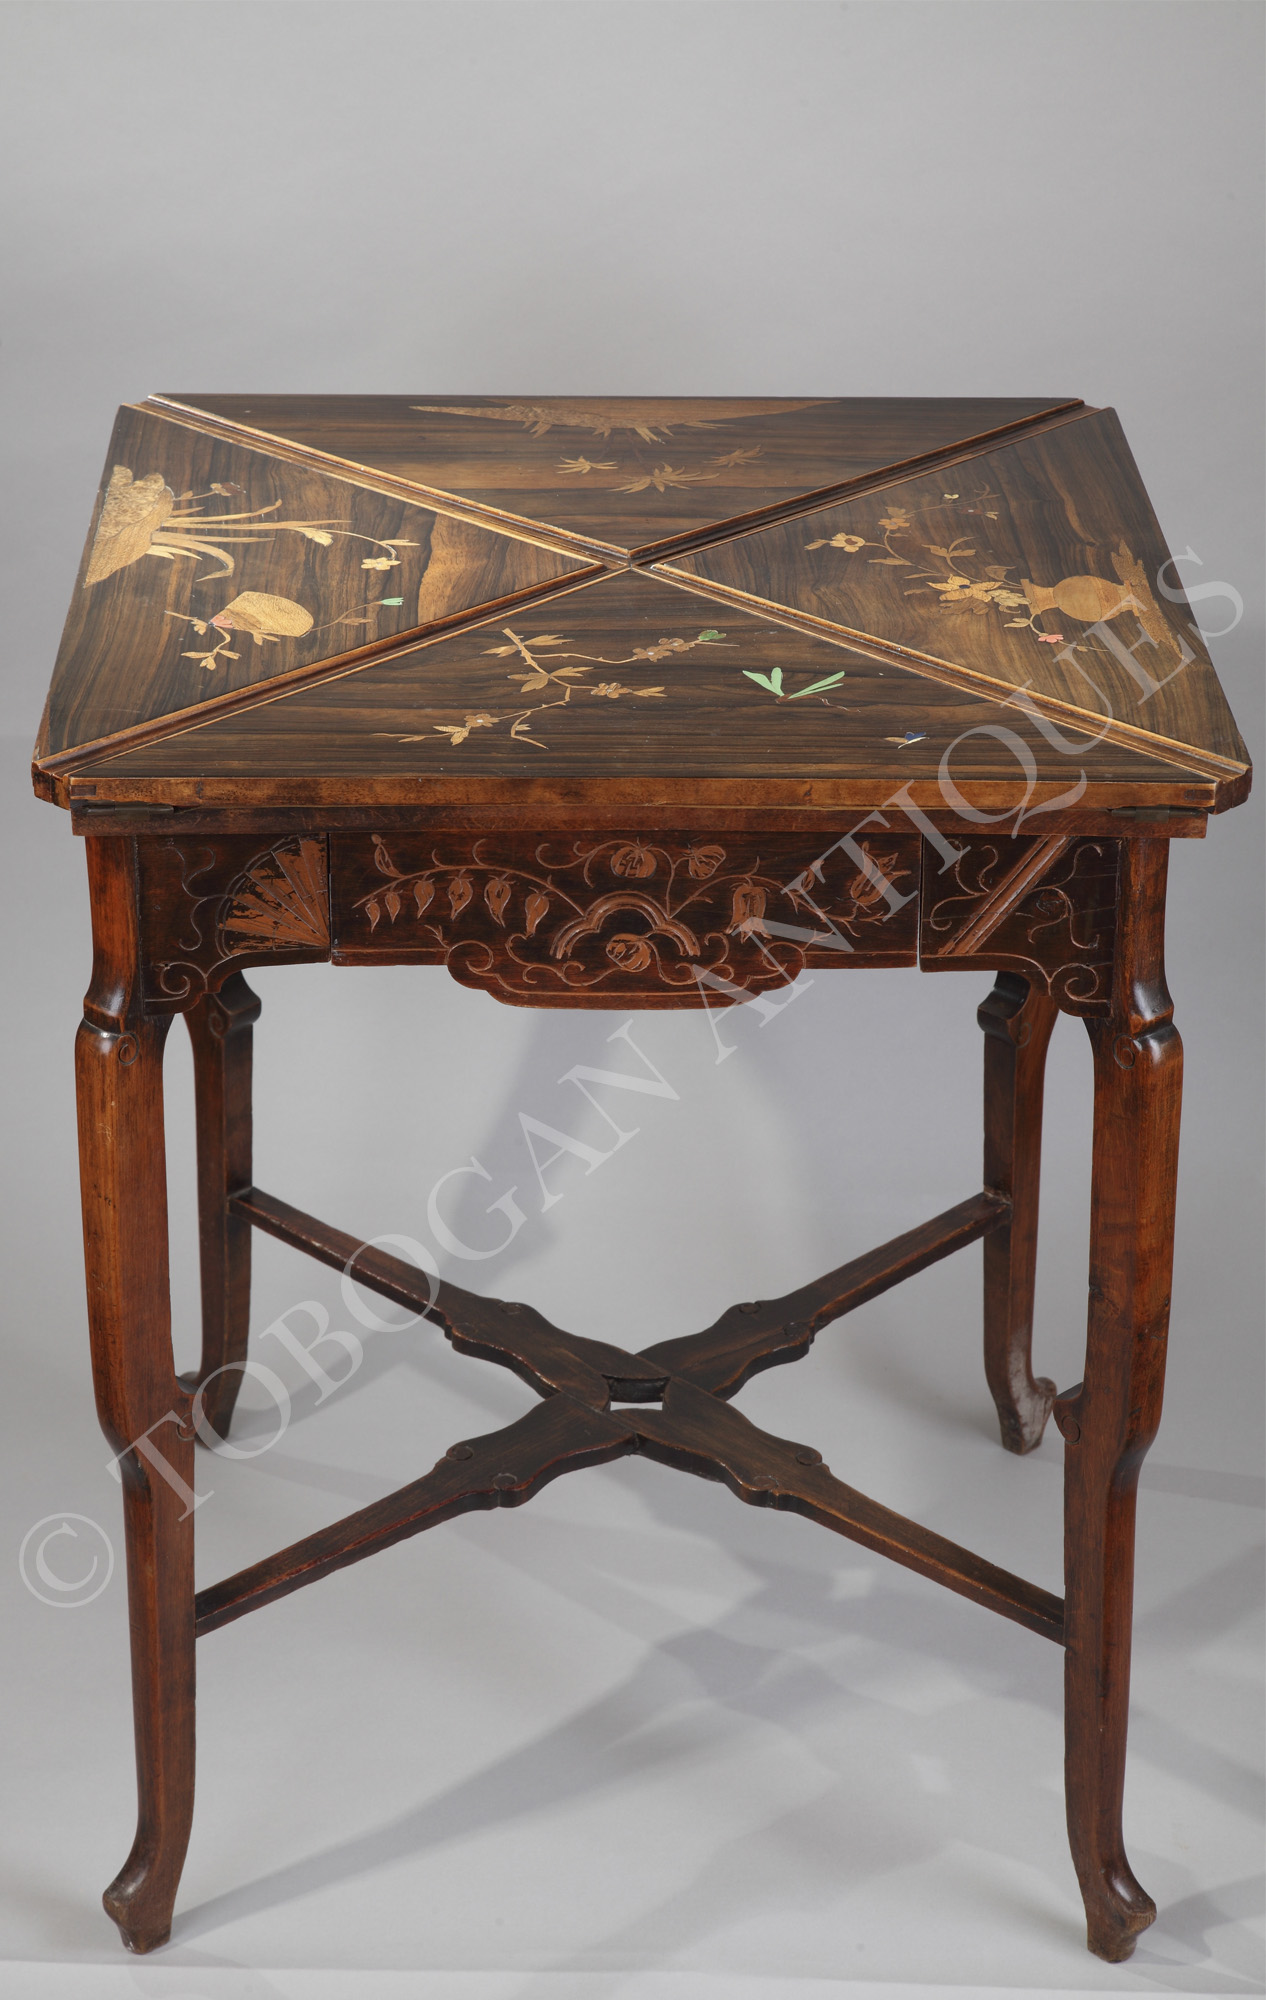 C. Balny <br/> Japanese Style Game Table